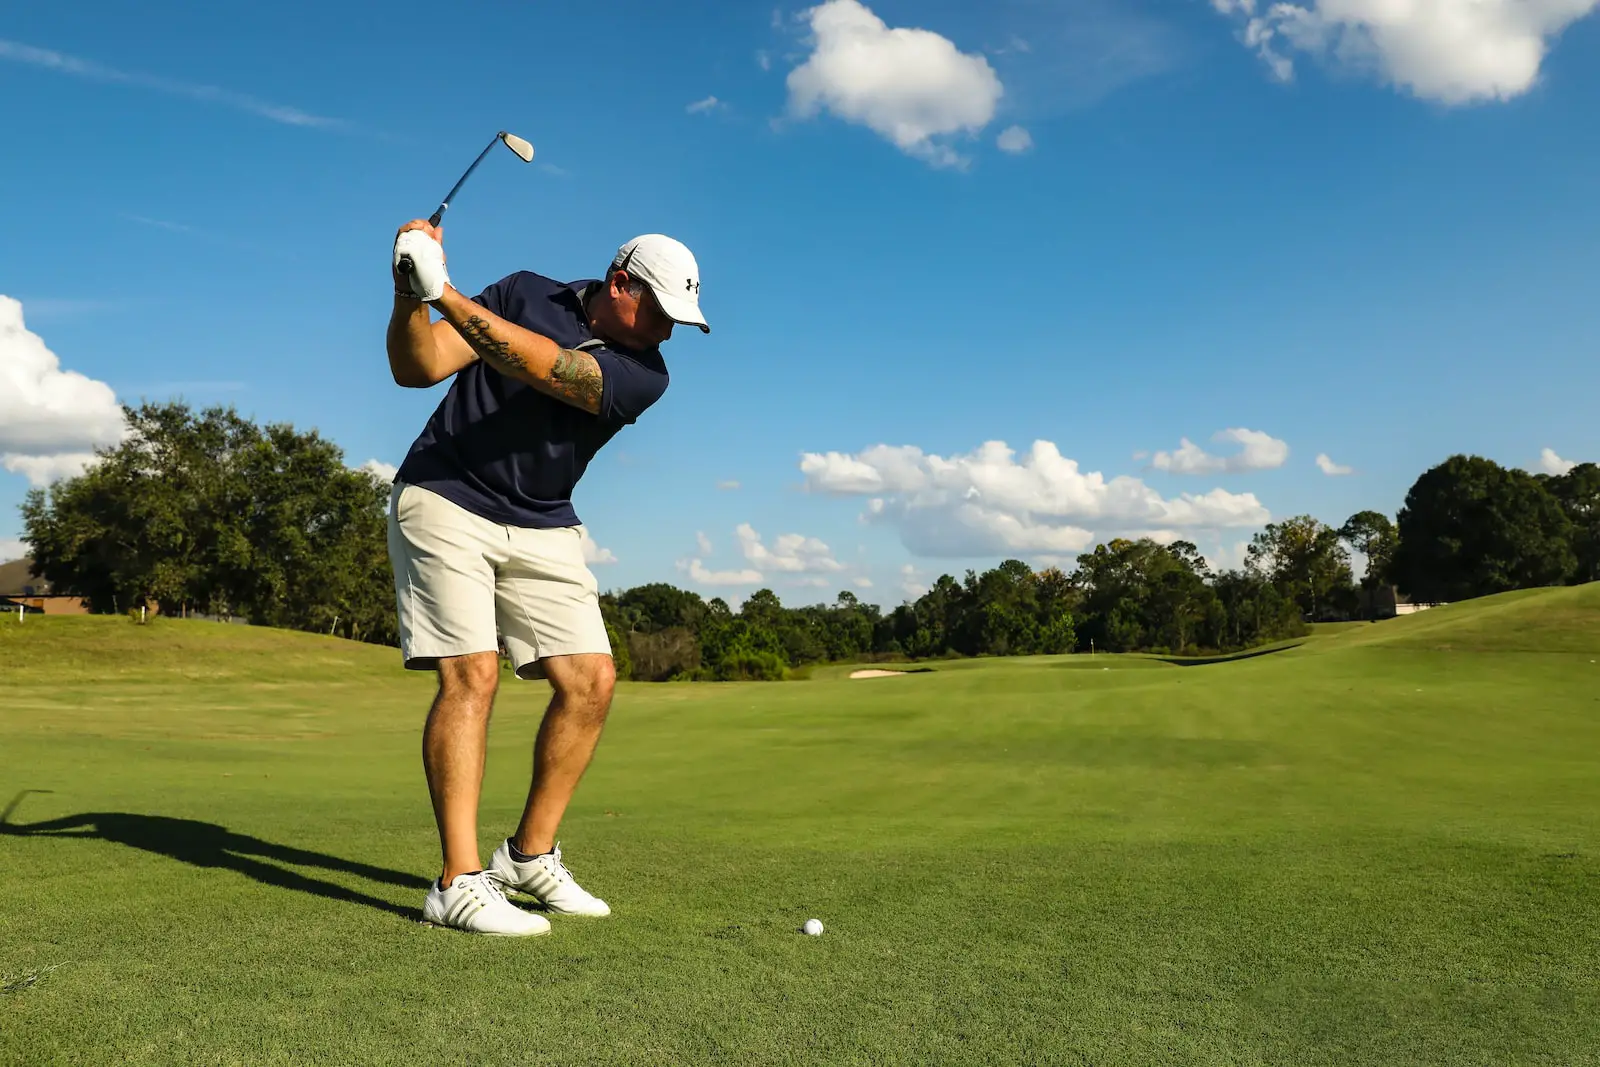 Reasons Why Golf Causes Neck Pain